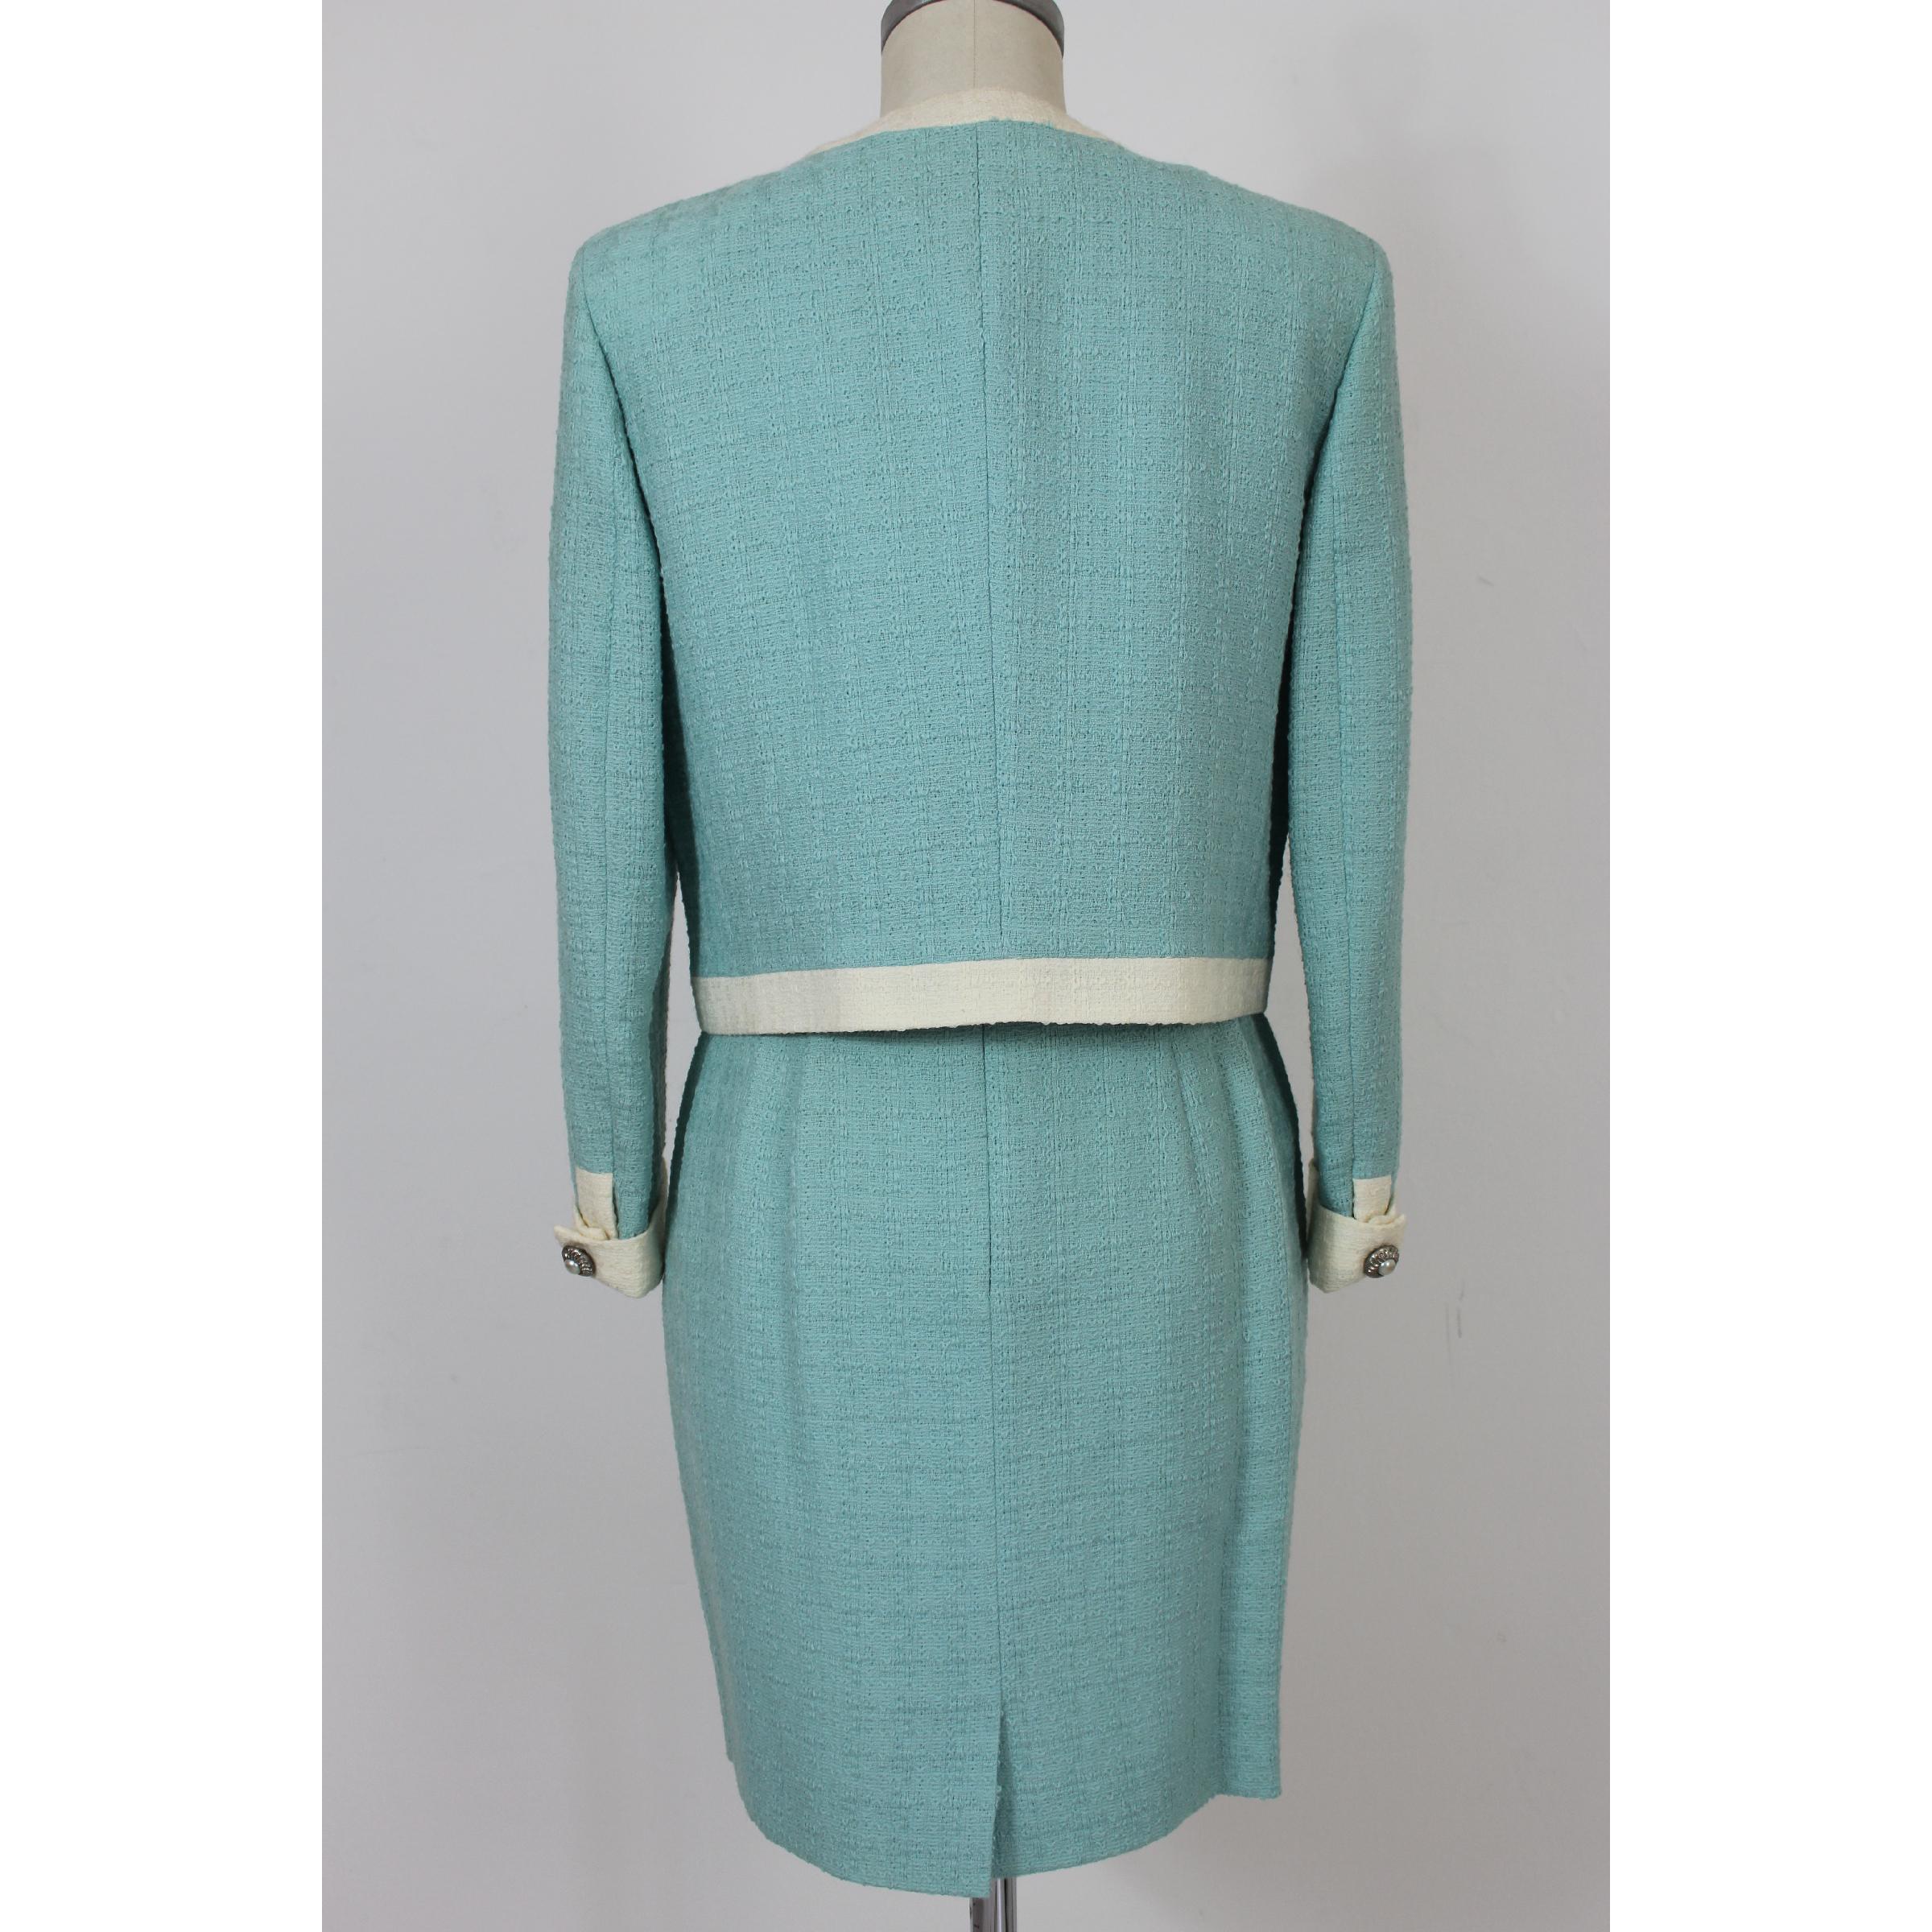 Laura Biagiotti Risposte vintage women's elegant suit skirt. Light blue and white, 98% wool 2% polyamide. Short model jacket at the waist, jewel button closure, skirt on the knee-length sheath model. 80s. Made in Italy. Excellent vintage condition.